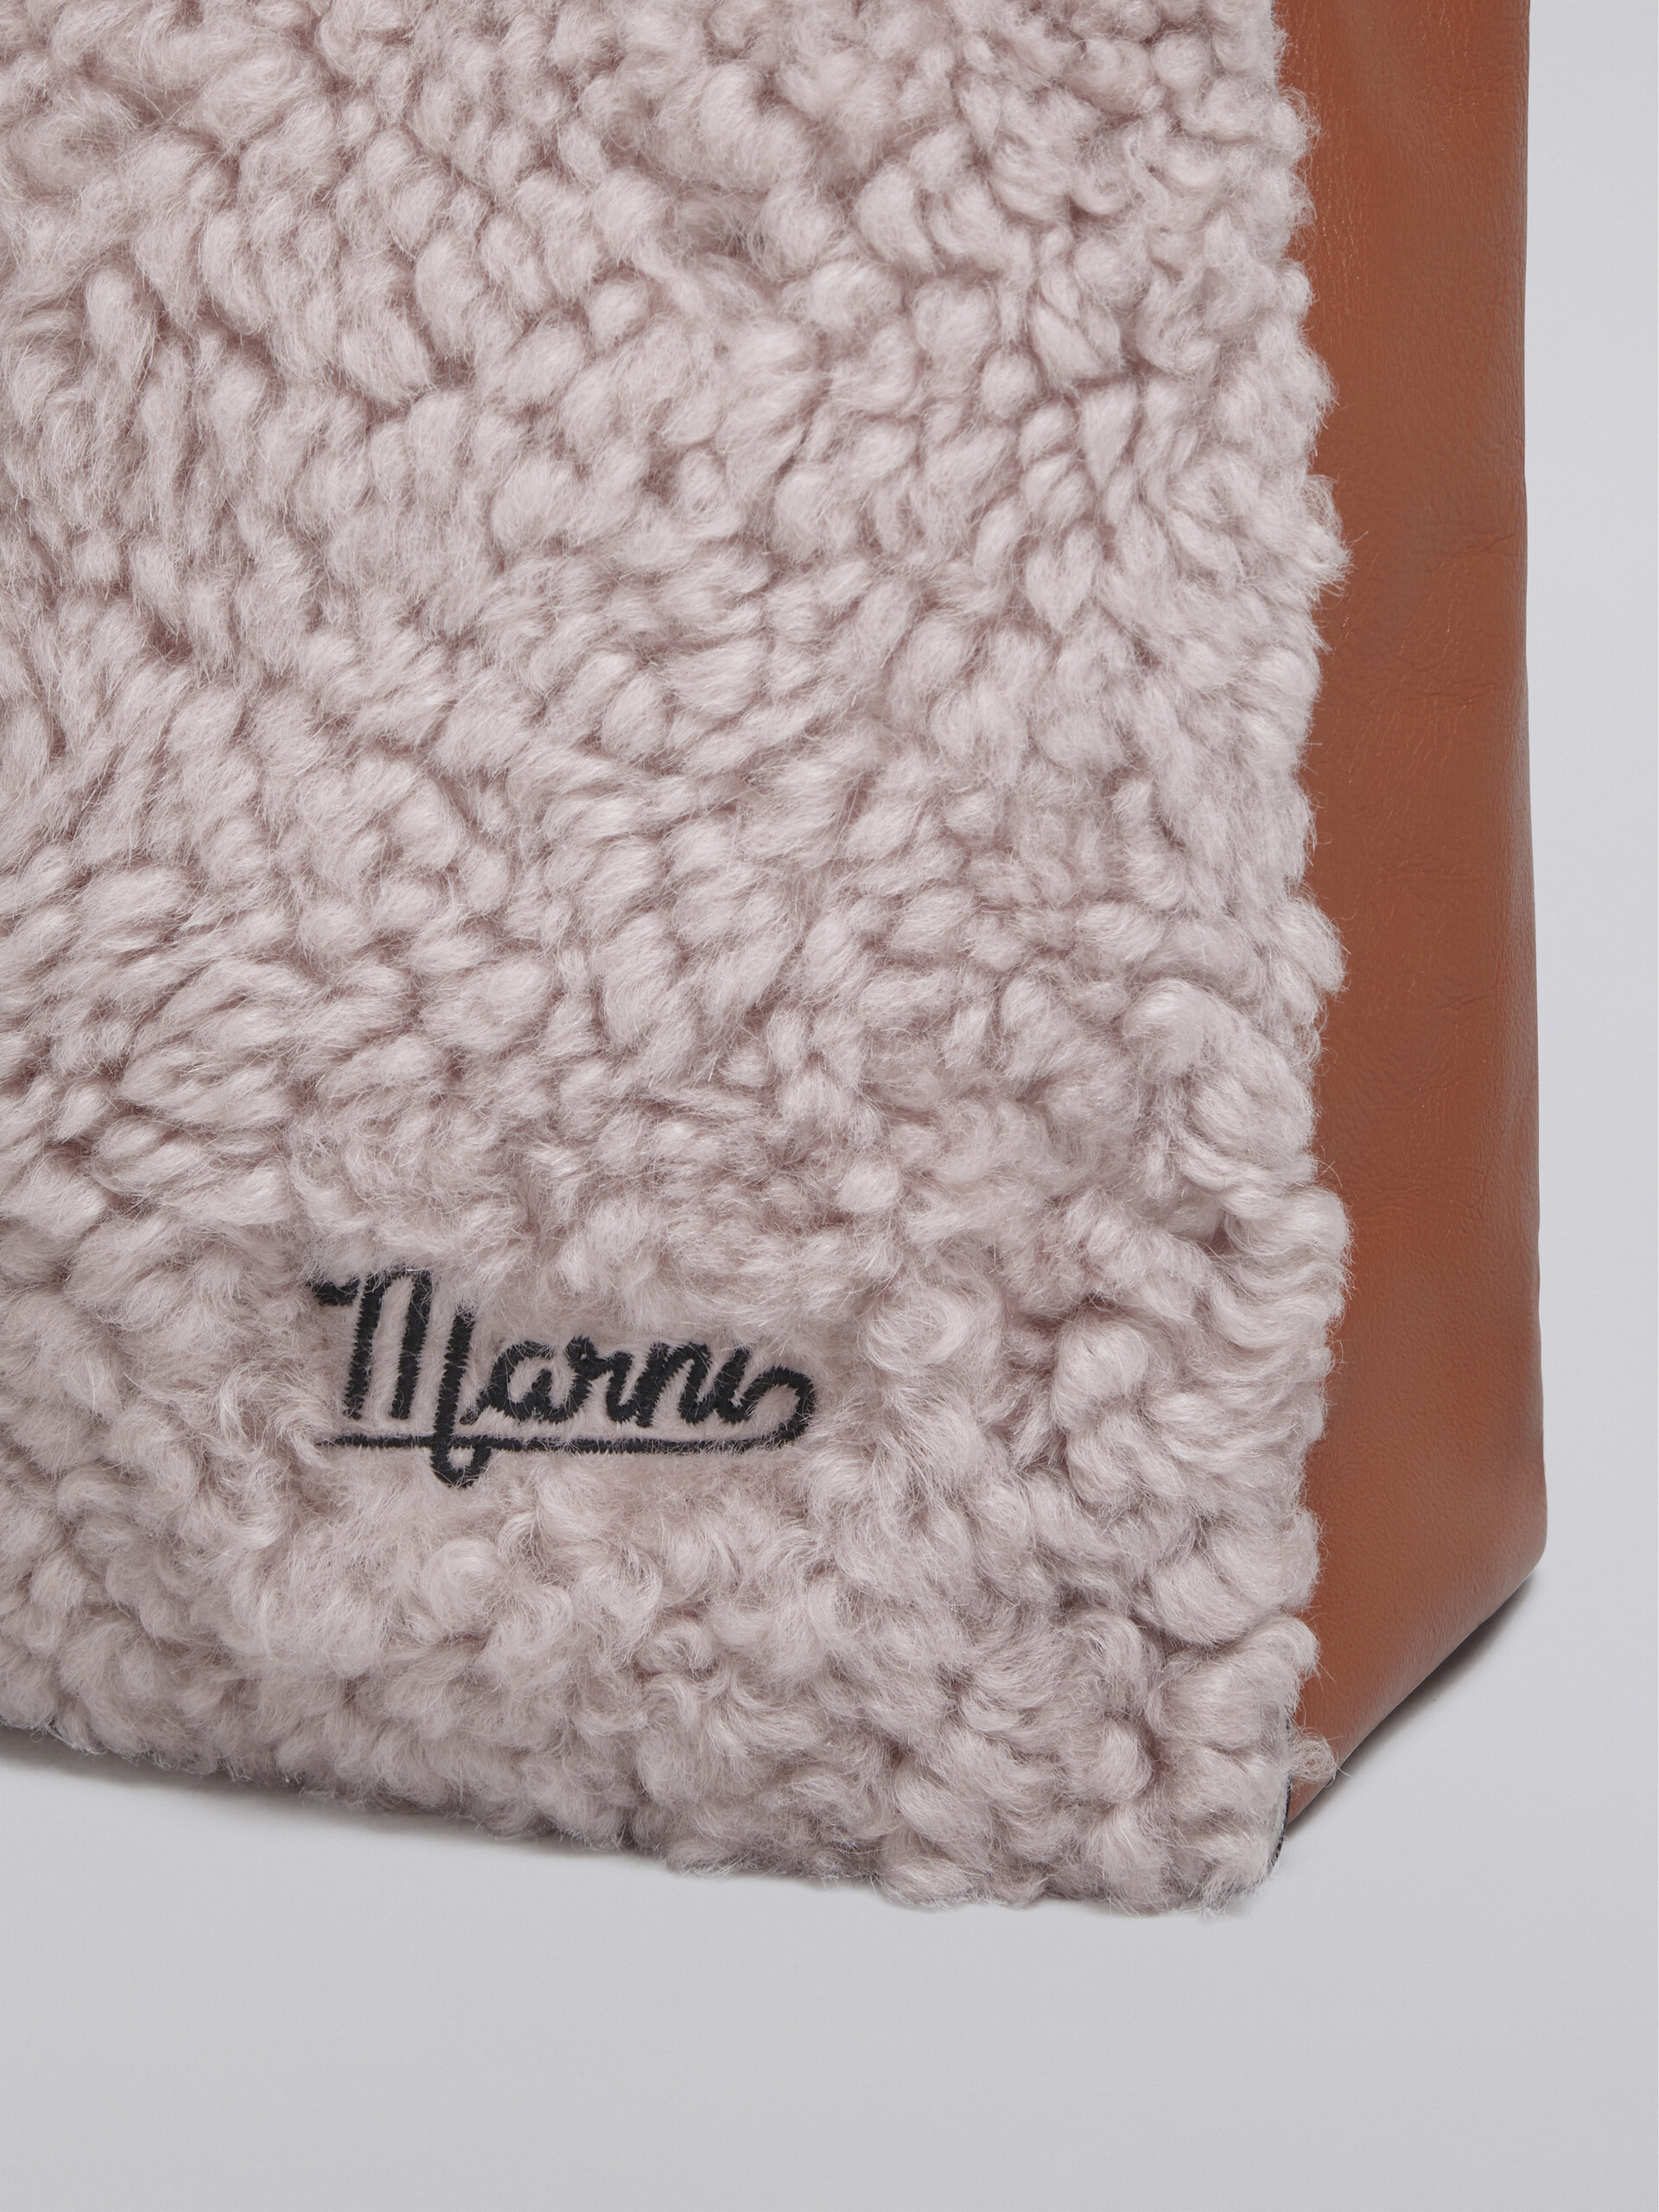 MUSEO SOFT bag in shearling and calfskin with embroidered logo - Shopping Bags - Image 3